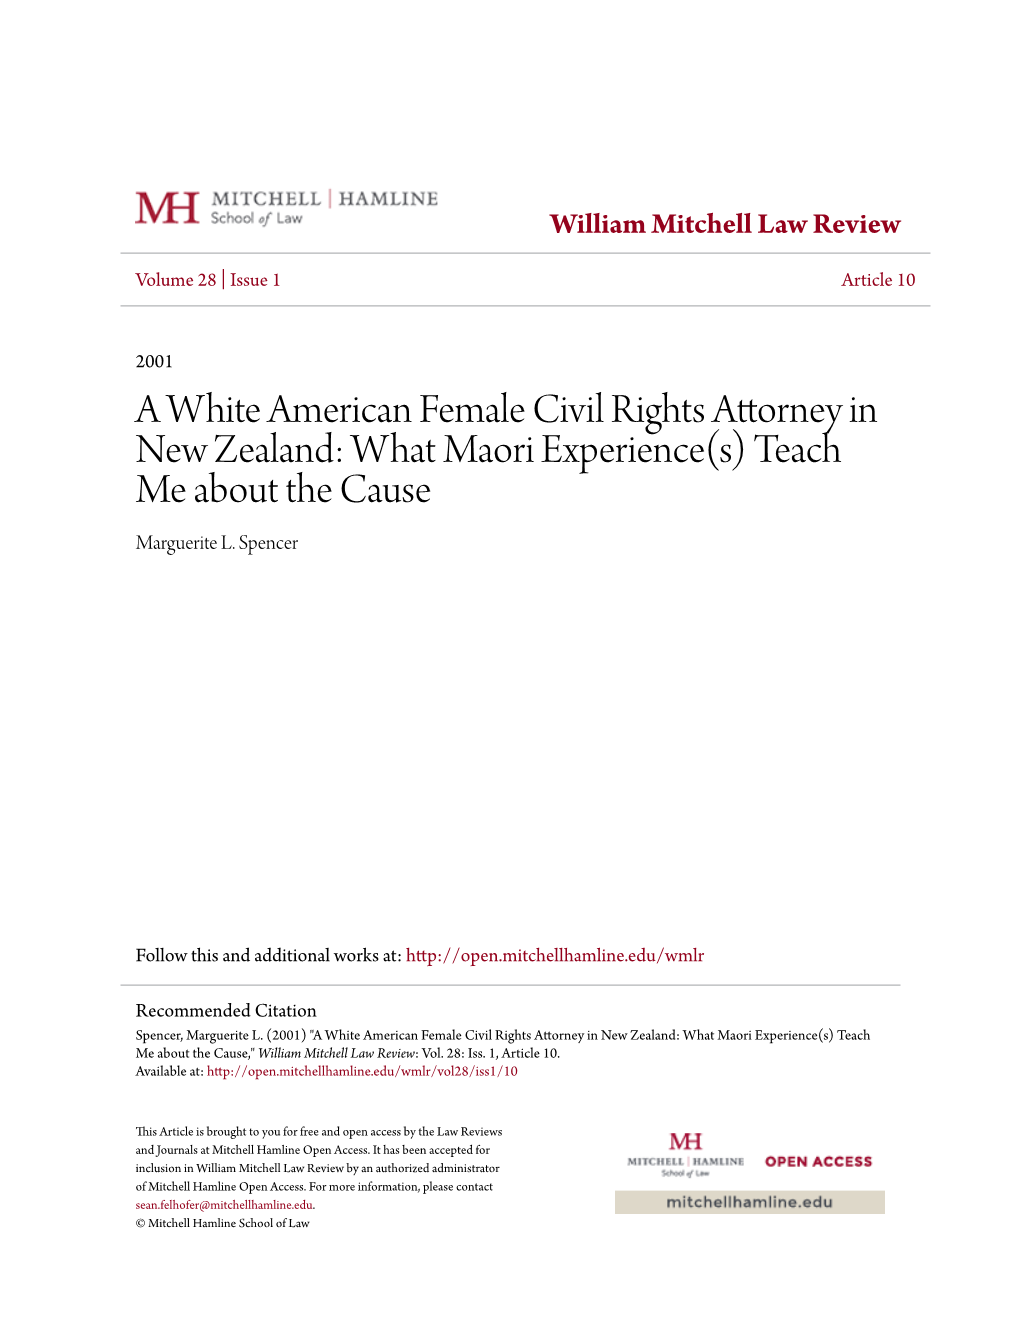 A White American Female Civil Rights Attorney in New Zealand: What Maori Experience(S) Teach Me About the Cause Marguerite L